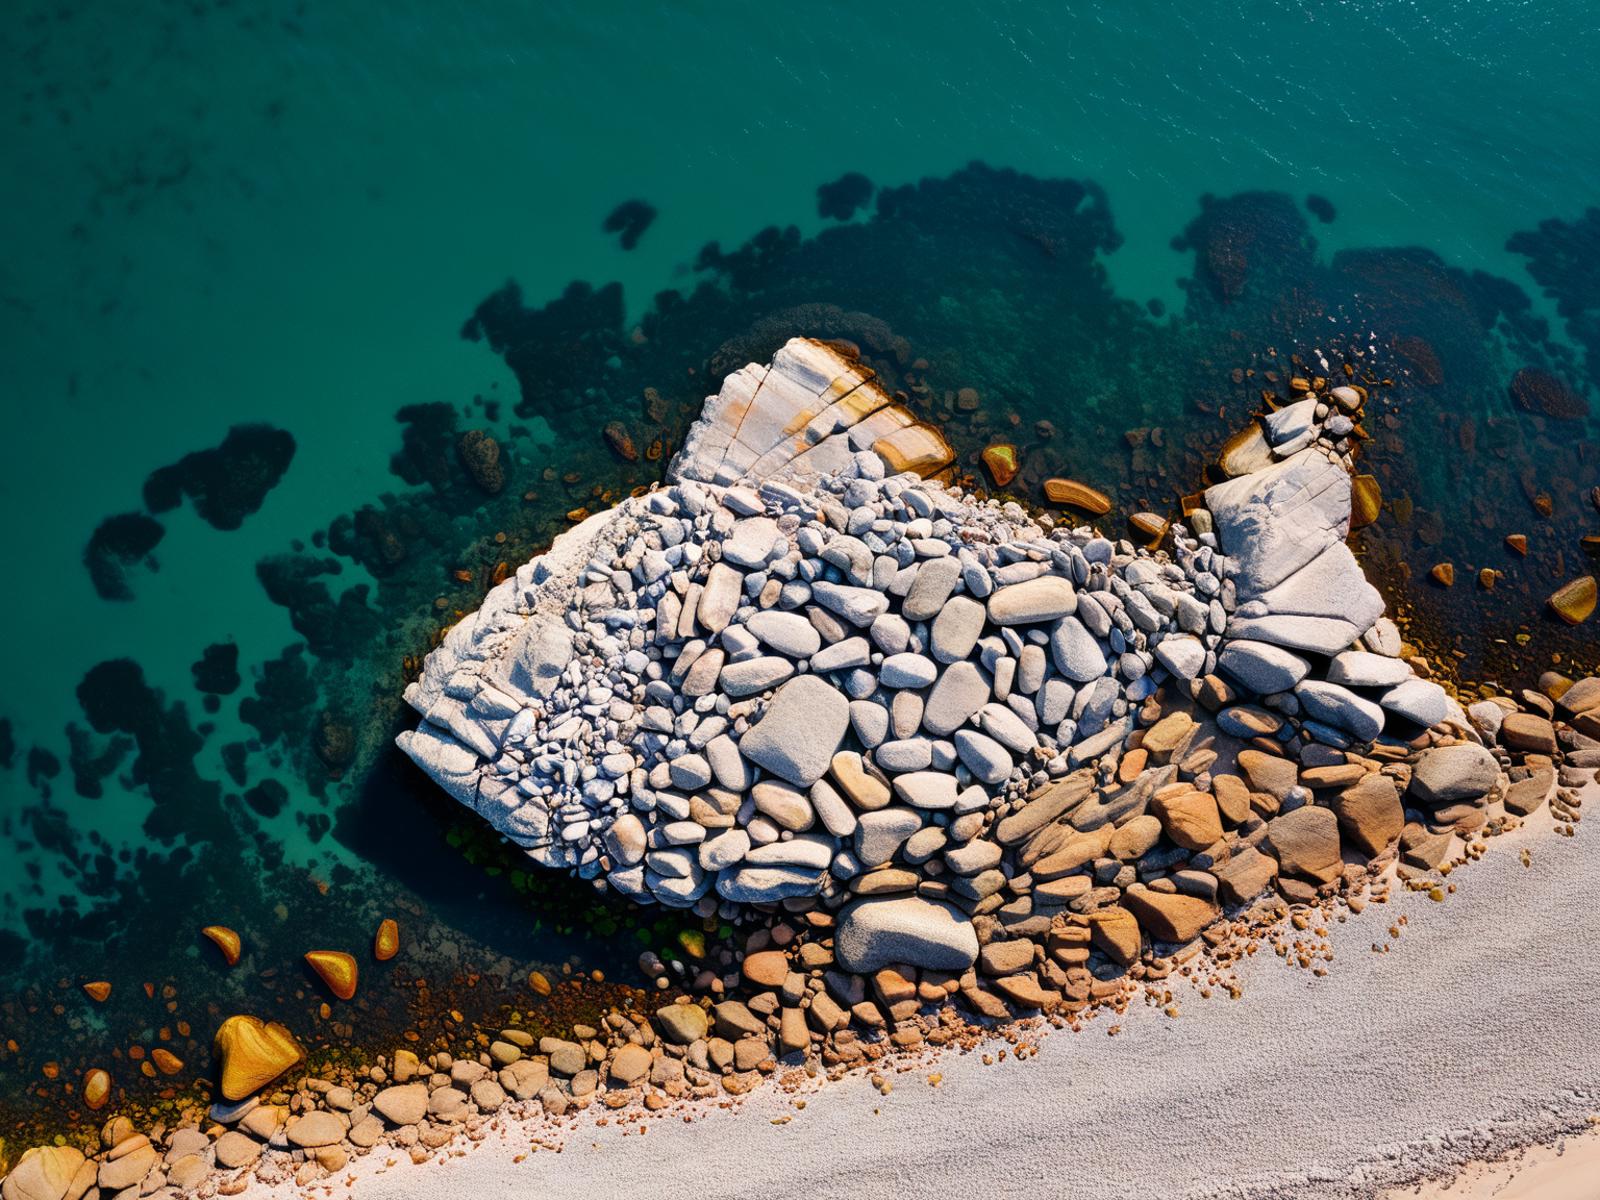 A rocky beach with a large rock in the water and a fish-like shape.